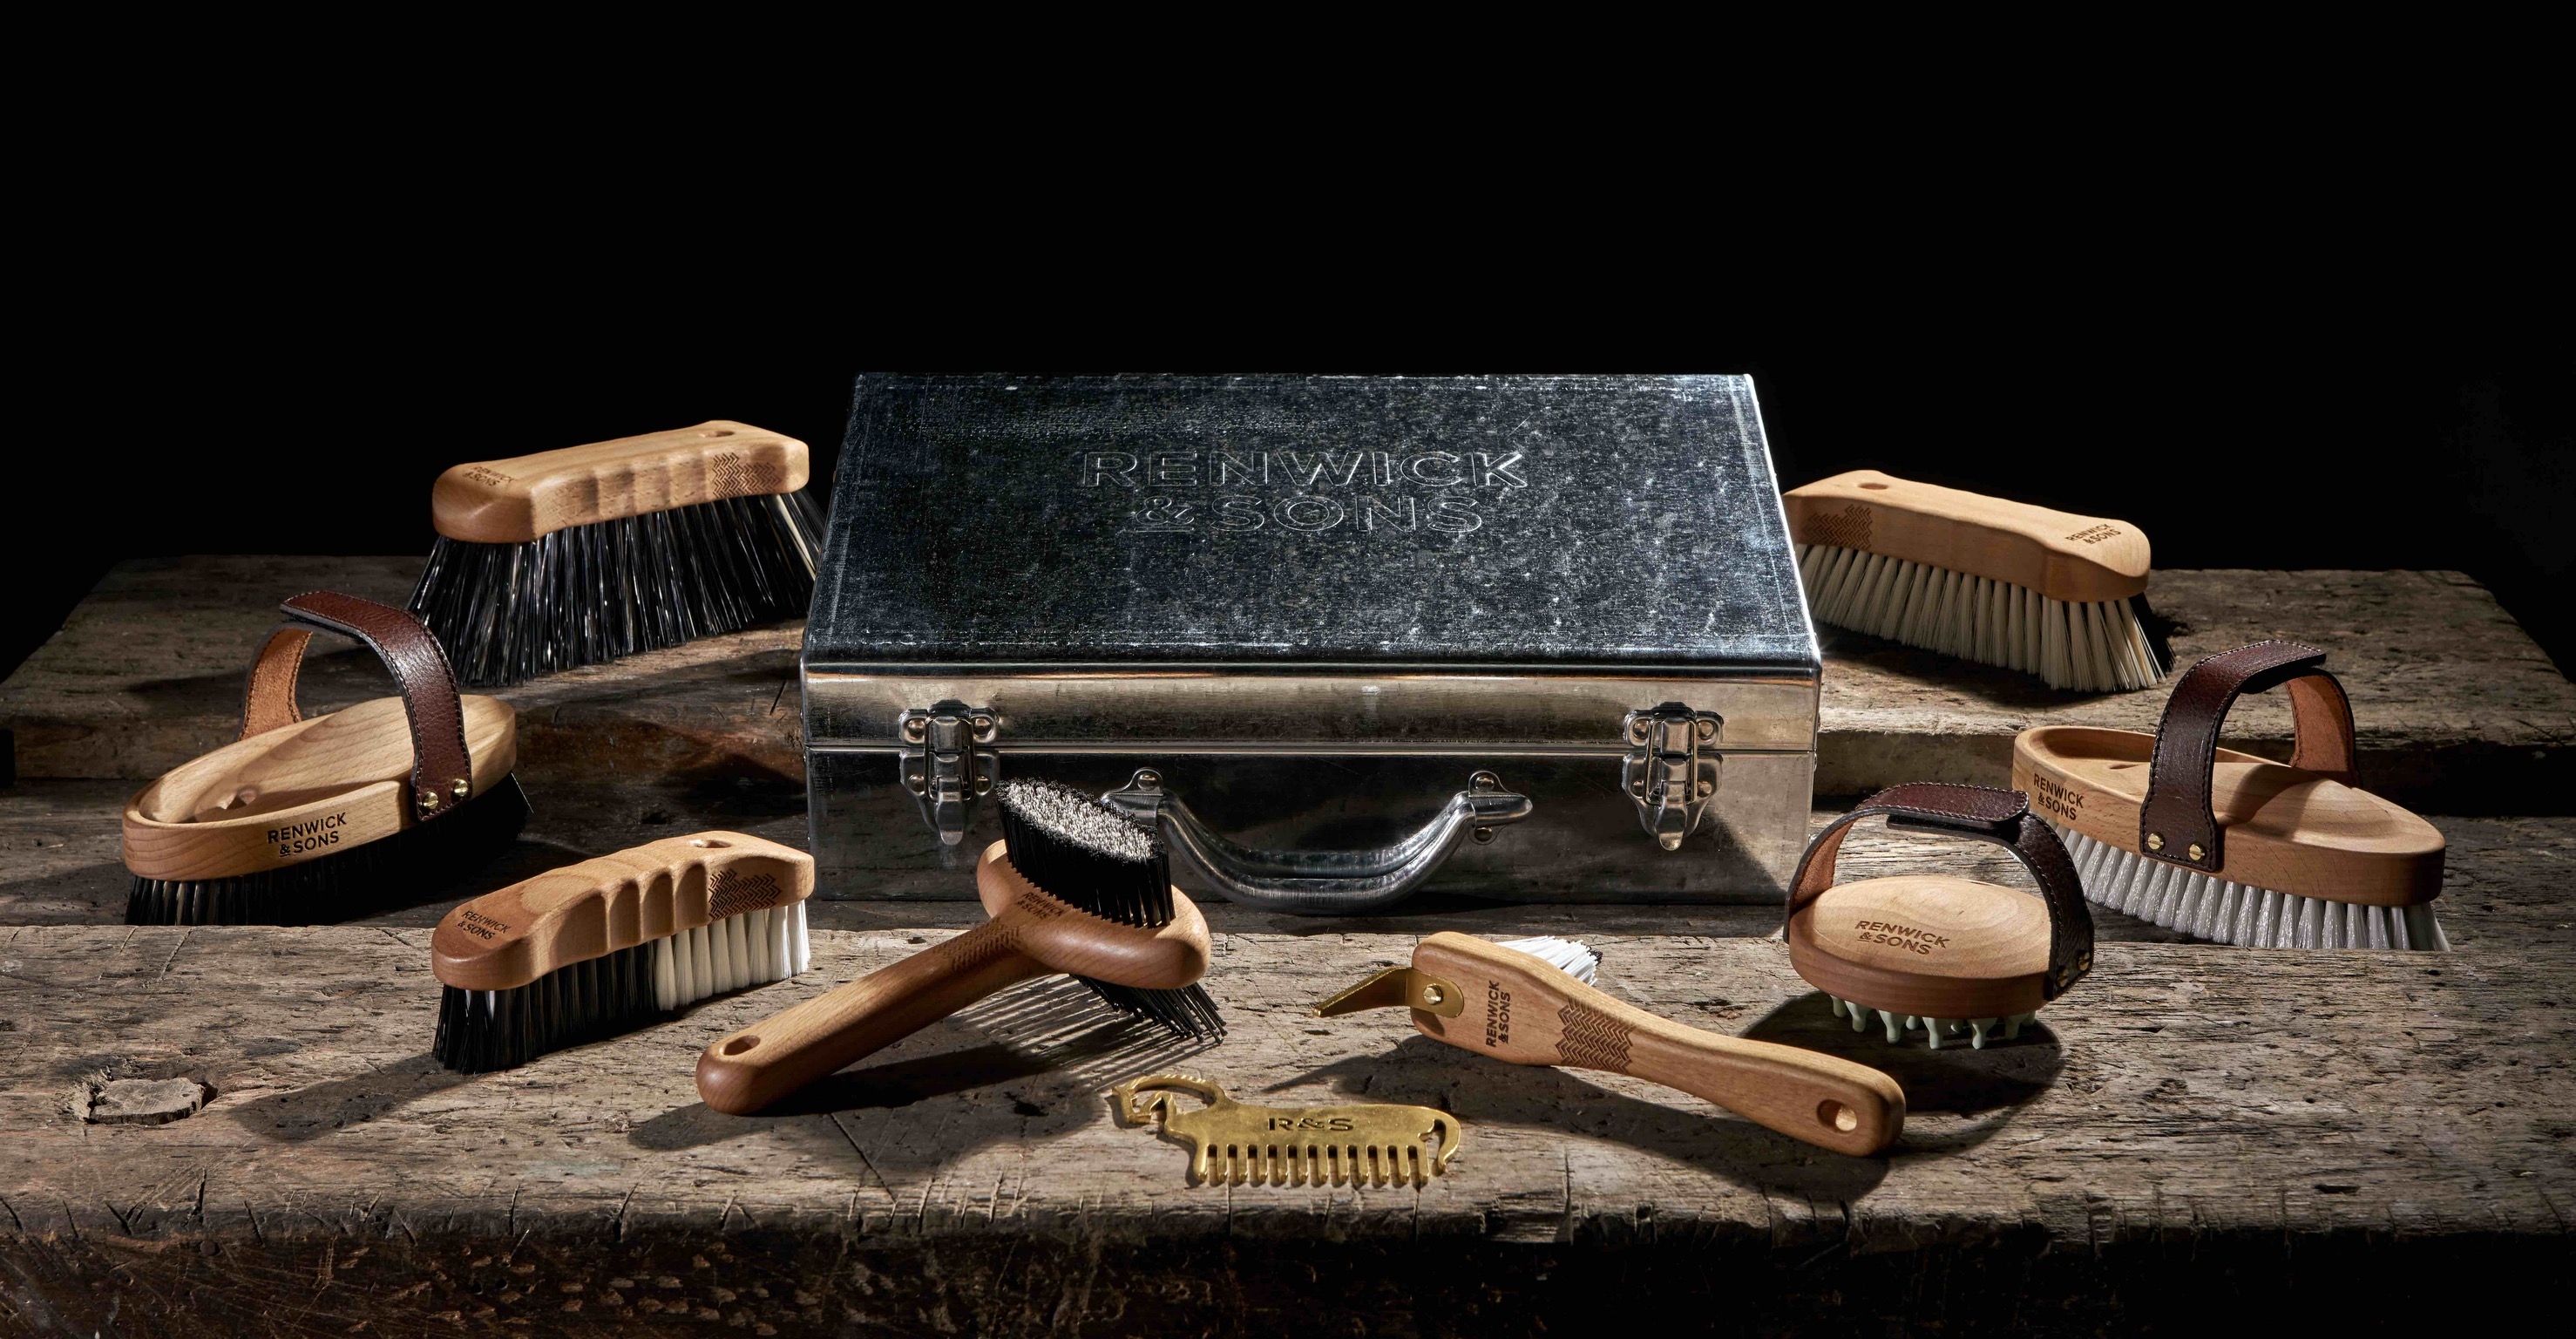 Introducing the Renwick & Sons Brushware Collection